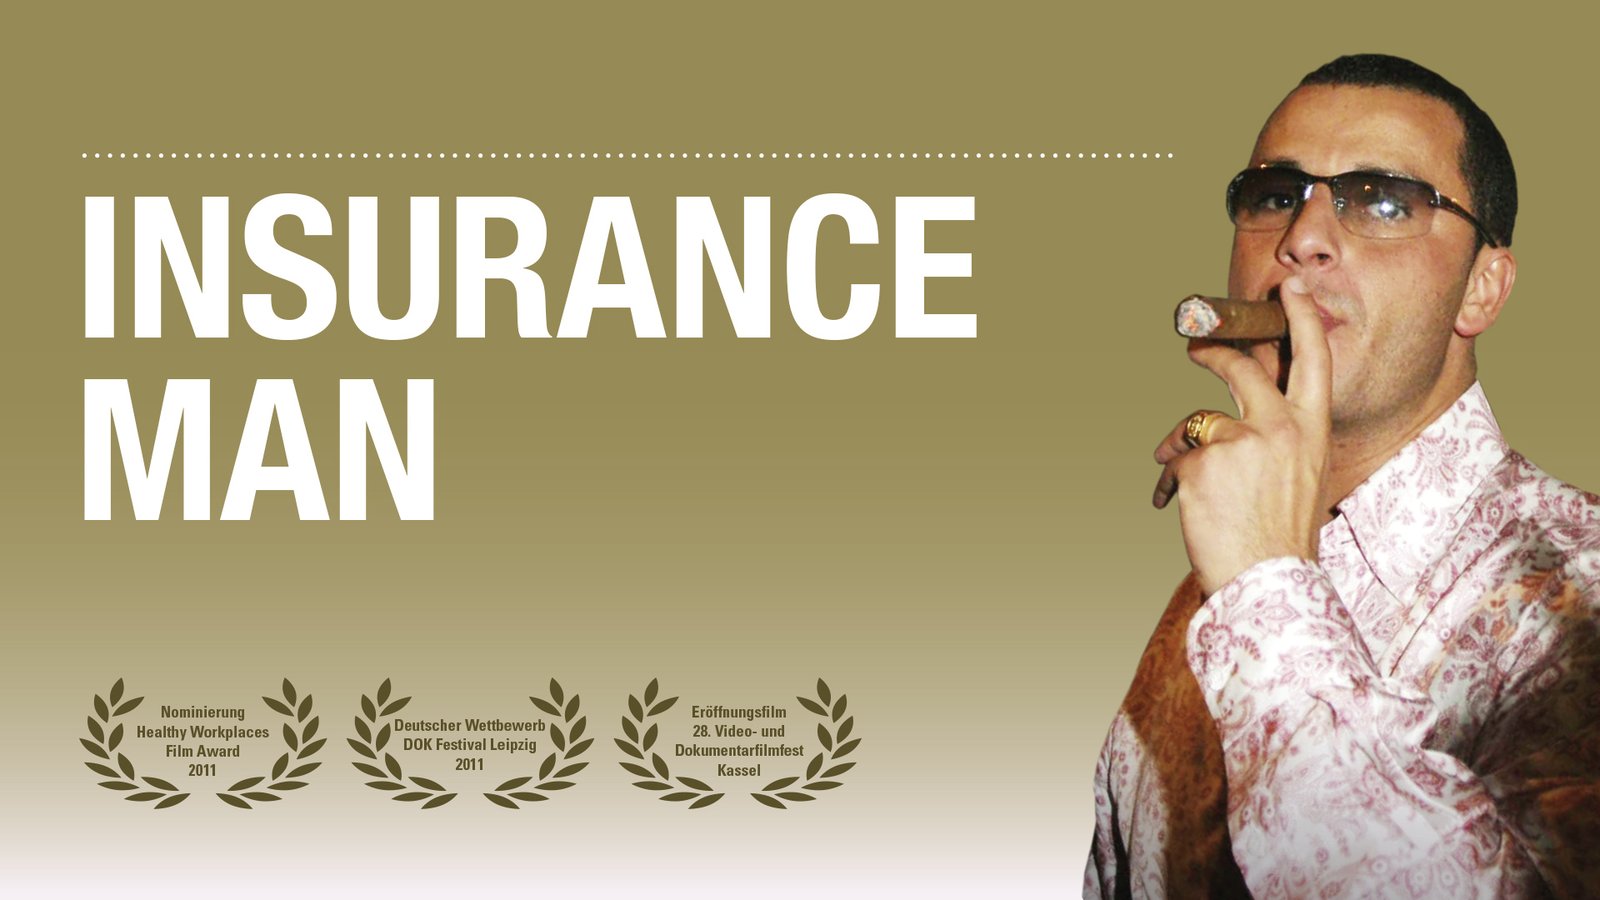 Insurance Man - A Controversial and Charismatic Insurance Broker